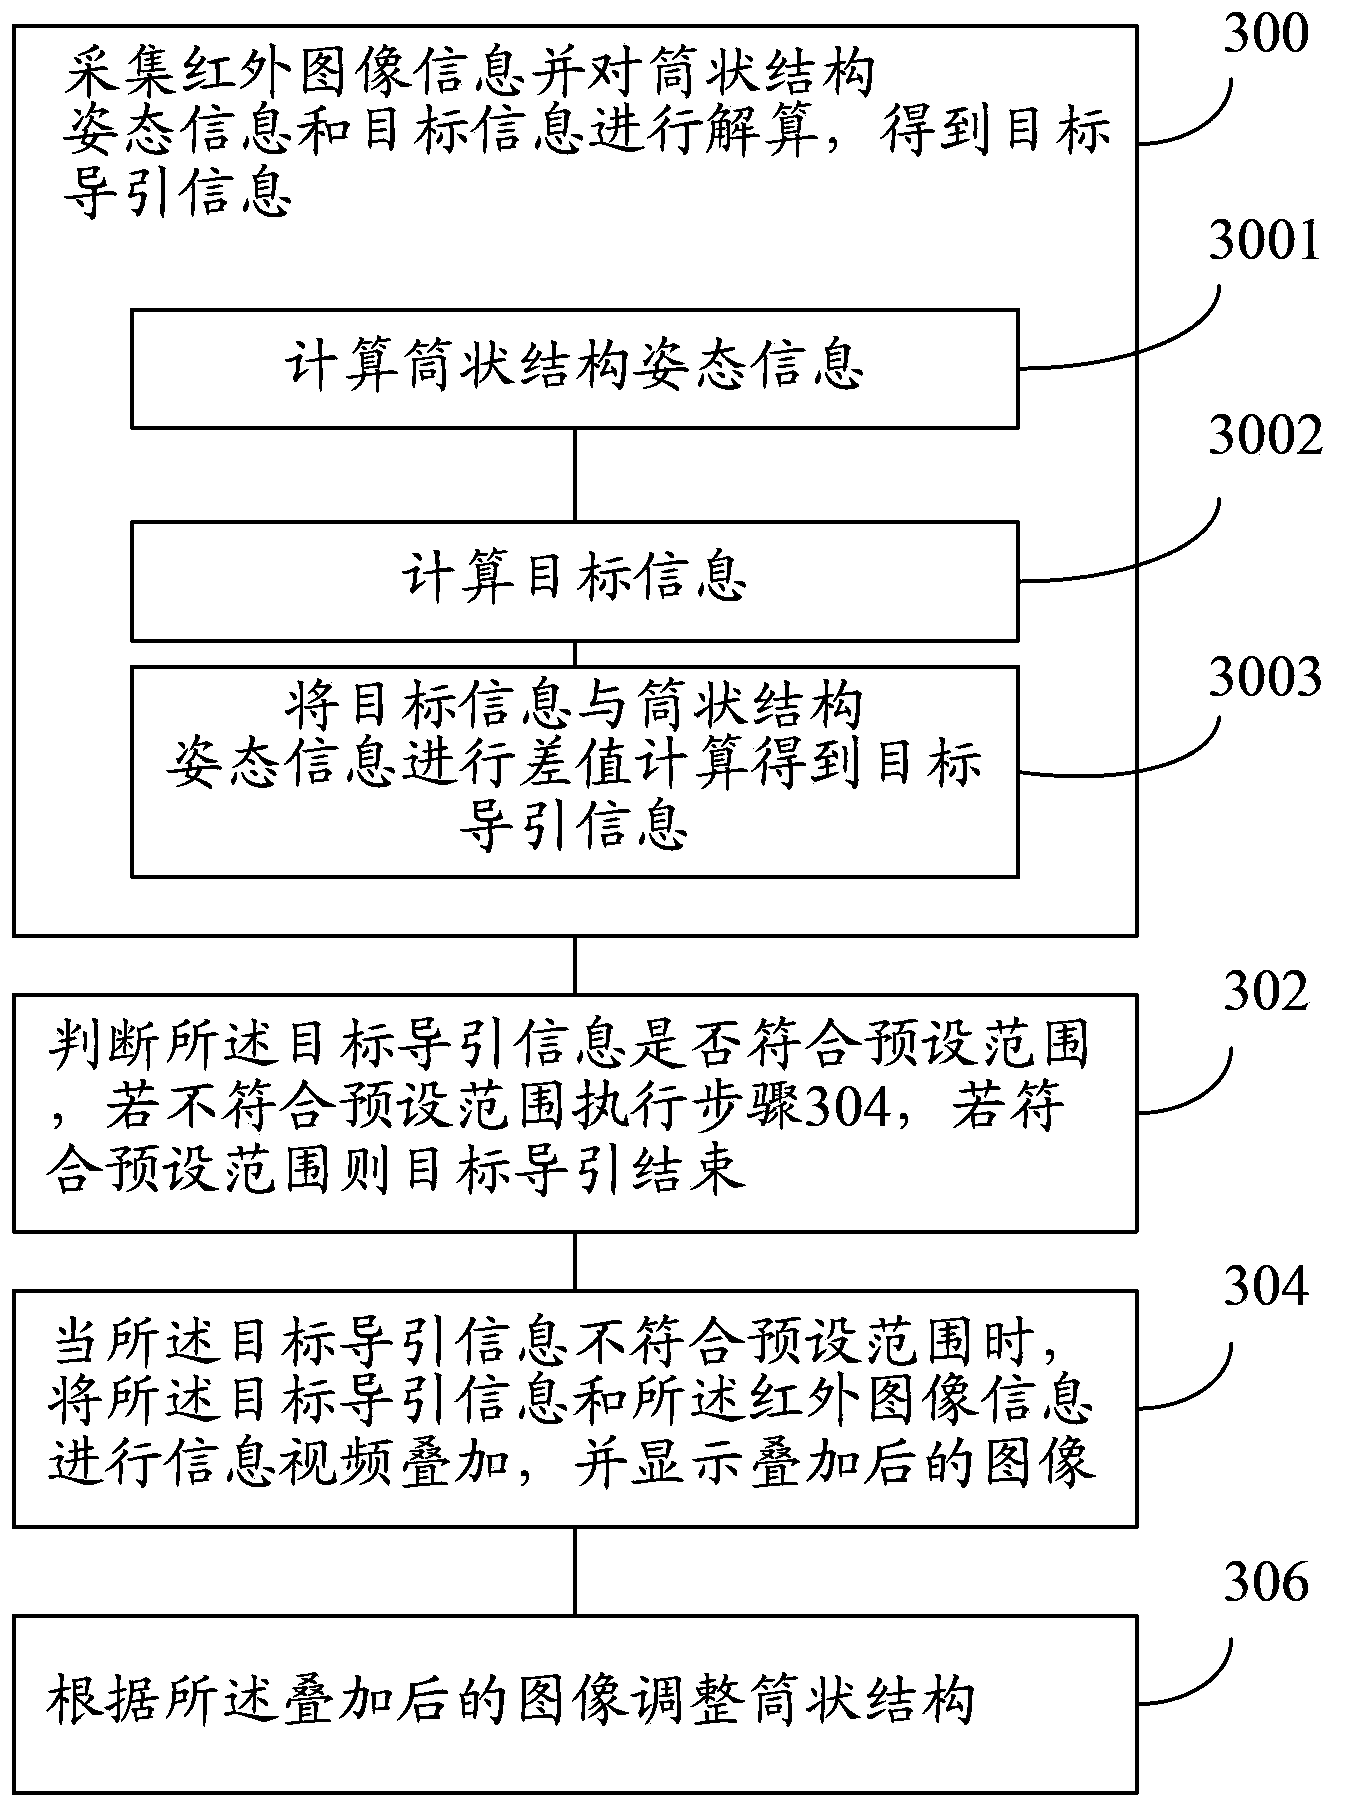 Object guide method and object guide system